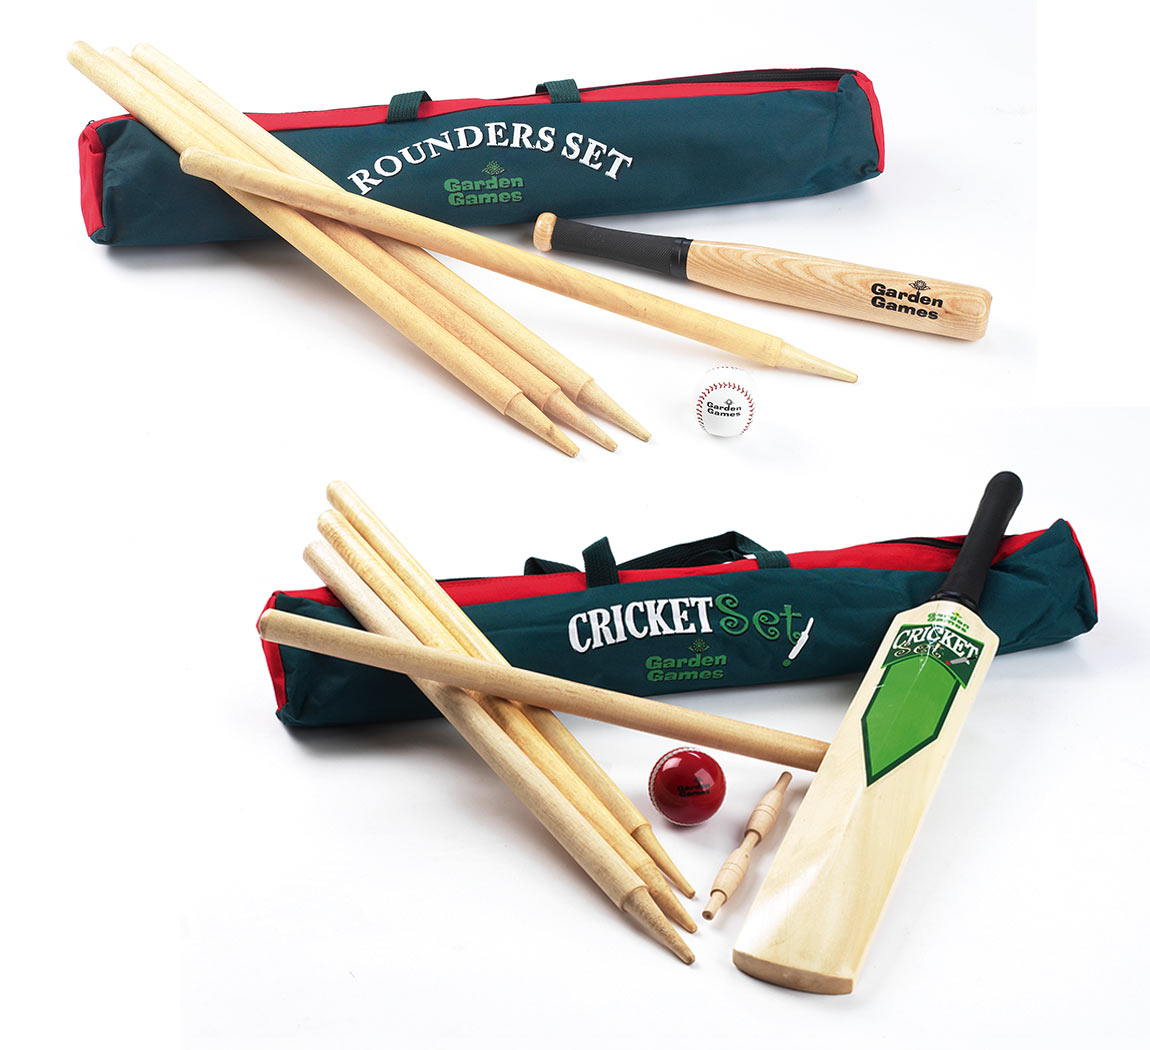 COMPETITION – Win a Rounders and Cricket Set!